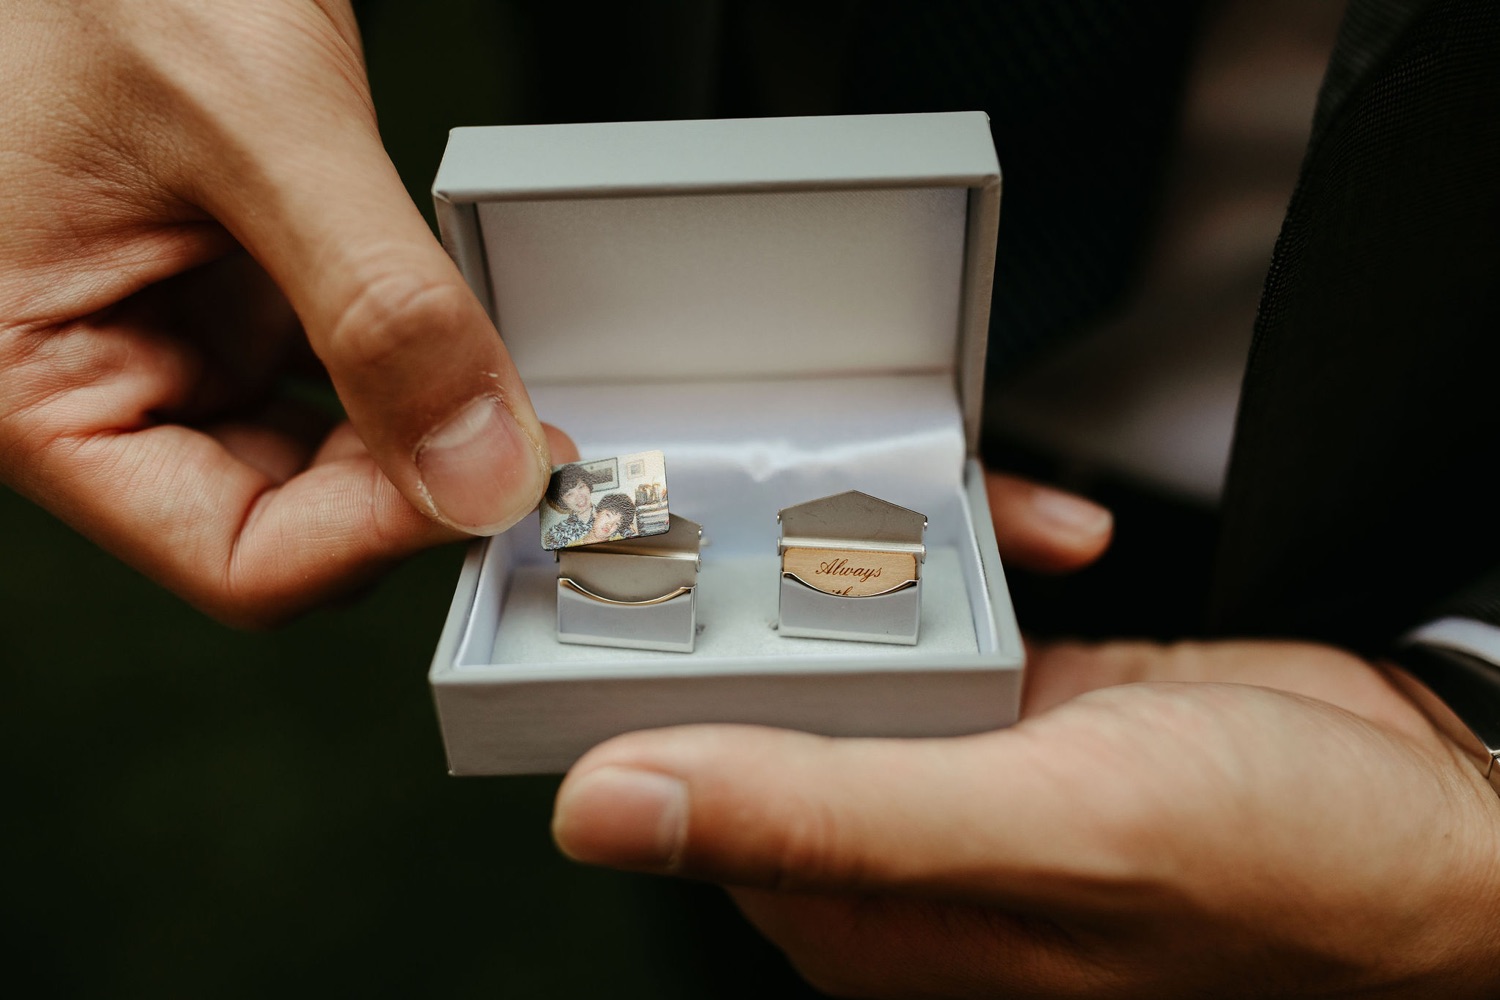 bride gifted customized cuff links to groom